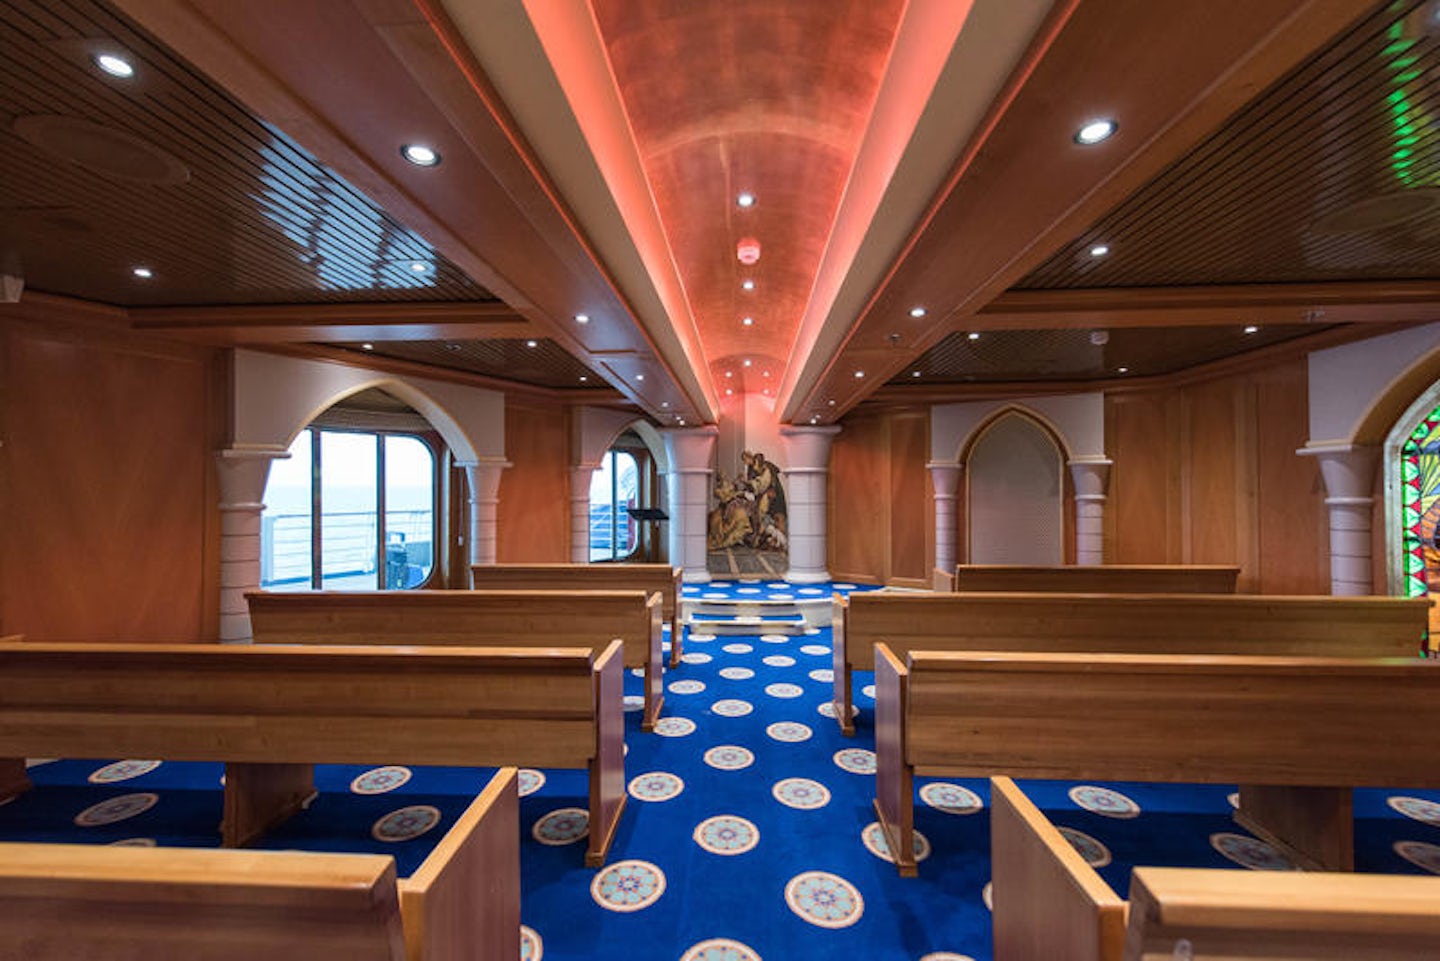 Wedding Chapel on Carnival Miracle